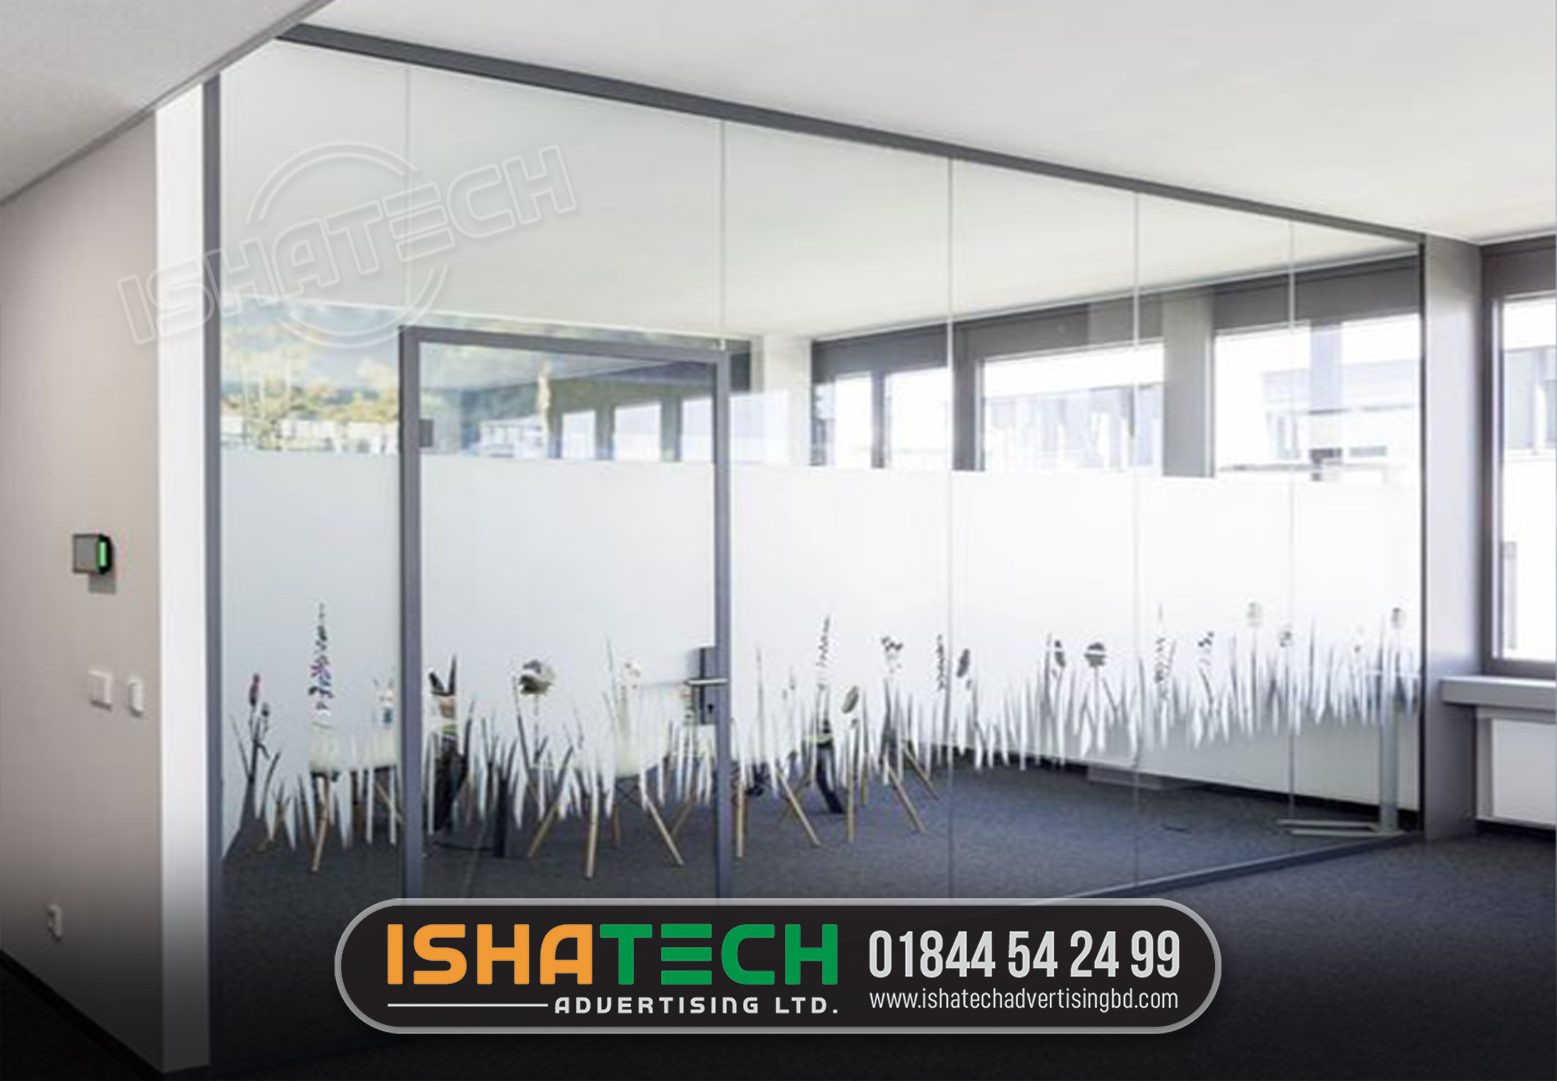 Office Glass Clear Frosted Sticker Print & Pasting Price in Bangladesh, Office Glass Clear Frosted Sticker Print & Pasting Price in Bangladesh. @ Project of #Dream_Travel_point @ Address #Badda_Dhaka_Bangladesh @ Complete by #IshaTech_Advertising_Ltd @ Terms and Conditions: Three Years Service’s with Materials Warranty. ?Contact us for more information: Cell: 01844 - 542 499, 01844 - 542 498 ?Visit our Sent: E-mail: ishatech.advertising@gmail.com E-mail: info@ishatechadvertisingbd.com ?Corporate Office: 04-B/A, (2nd Floor), Mazar Road, Sector-1, Mirpur, Dhaka-1216. ?Factory Address: 44/B, (1st Floor), 2nd Colony, Dadar Bari, Mirpur-1, Dhaka-1216 ?To Visit Our Page: Website: www.ishatechadvertisingbd.com Service Page: https://bit.ly/3szkEJl Project Page: https://bit.ly/3u1PXNl Gallery Page: https://bit.ly/31qnchb Portfolio Page: https://bit.ly/3tzod2X Facebook Page: https://bit.ly/3pQIten Linkedin Page: https://bit.ly/3cE3YeB Instagram: https://bit.ly/3tz9VQc Twitter: https://bit.ly/3oODA4d YouTube: https://bit.ly/3pZO965 Acrylic Blog Page: https://bit.ly/3u4fg1m Acp Off Cut Page: https://bit.ly/2QhNjVt Name Plate Page: https://bit.ly/2QFicD4 LED Moving Display Page: https://bit.ly/3sxVeet Billboard Page: https://bit.ly/3gpOf4U Wall Boundary Page: https://bit.ly/3v3nY0f #p2_led_display_board #p3_led_display_board #p4_led_display_board #p5_led_display_board #p6_led_display_board #p7_led_displayapleborda #8elaididisaplay_board #p9_led_display_board #p10_led_display_board #led_sign #led_moving_sign #led_display_board #programmable_led_sign #outdoor_led_displays #indoor_led_displays #outdoor_led_sign #indoor_led_sign #scrolling_led_signs #stadium_led_displays #outdoor_led_display #advertising_outdoor_led_display #indoor_led_video_walls #outdoor_led_display #vehicle_led_display